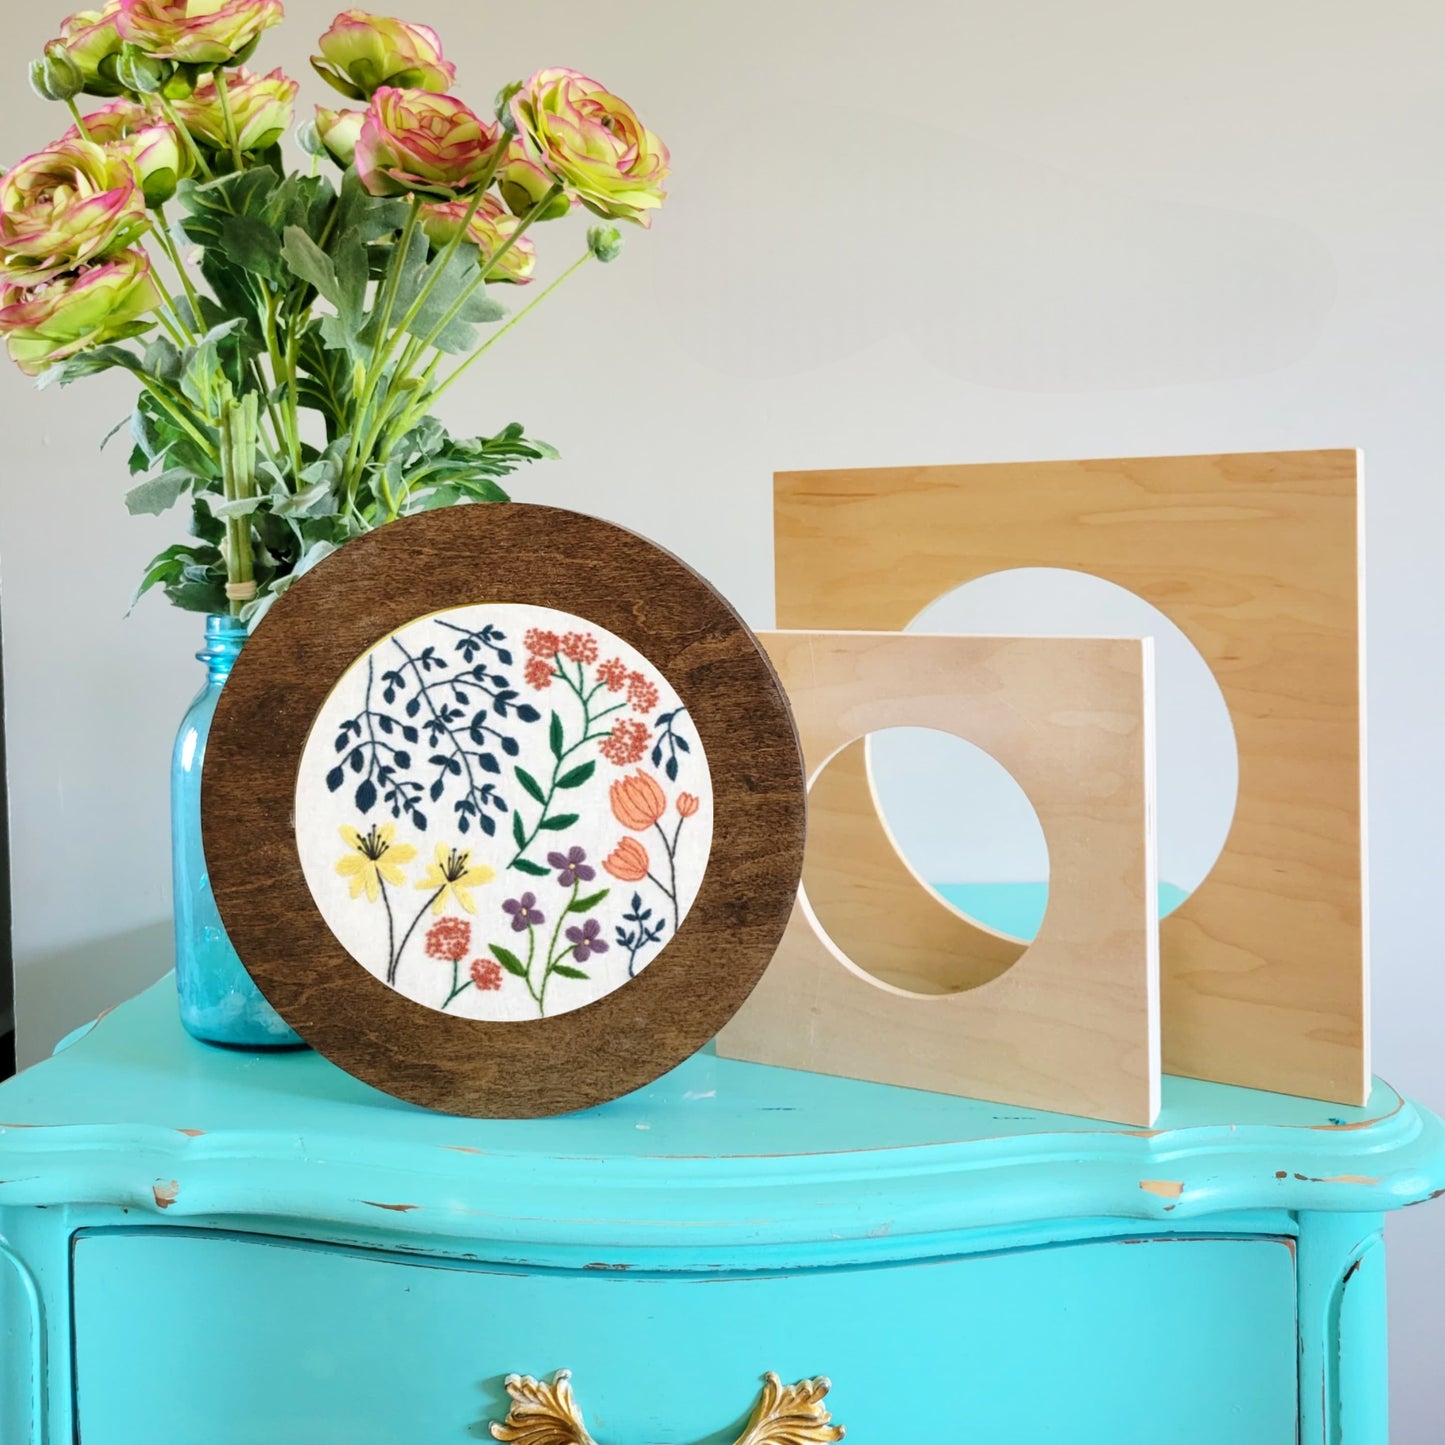 Square Embroidery Hoop Frames